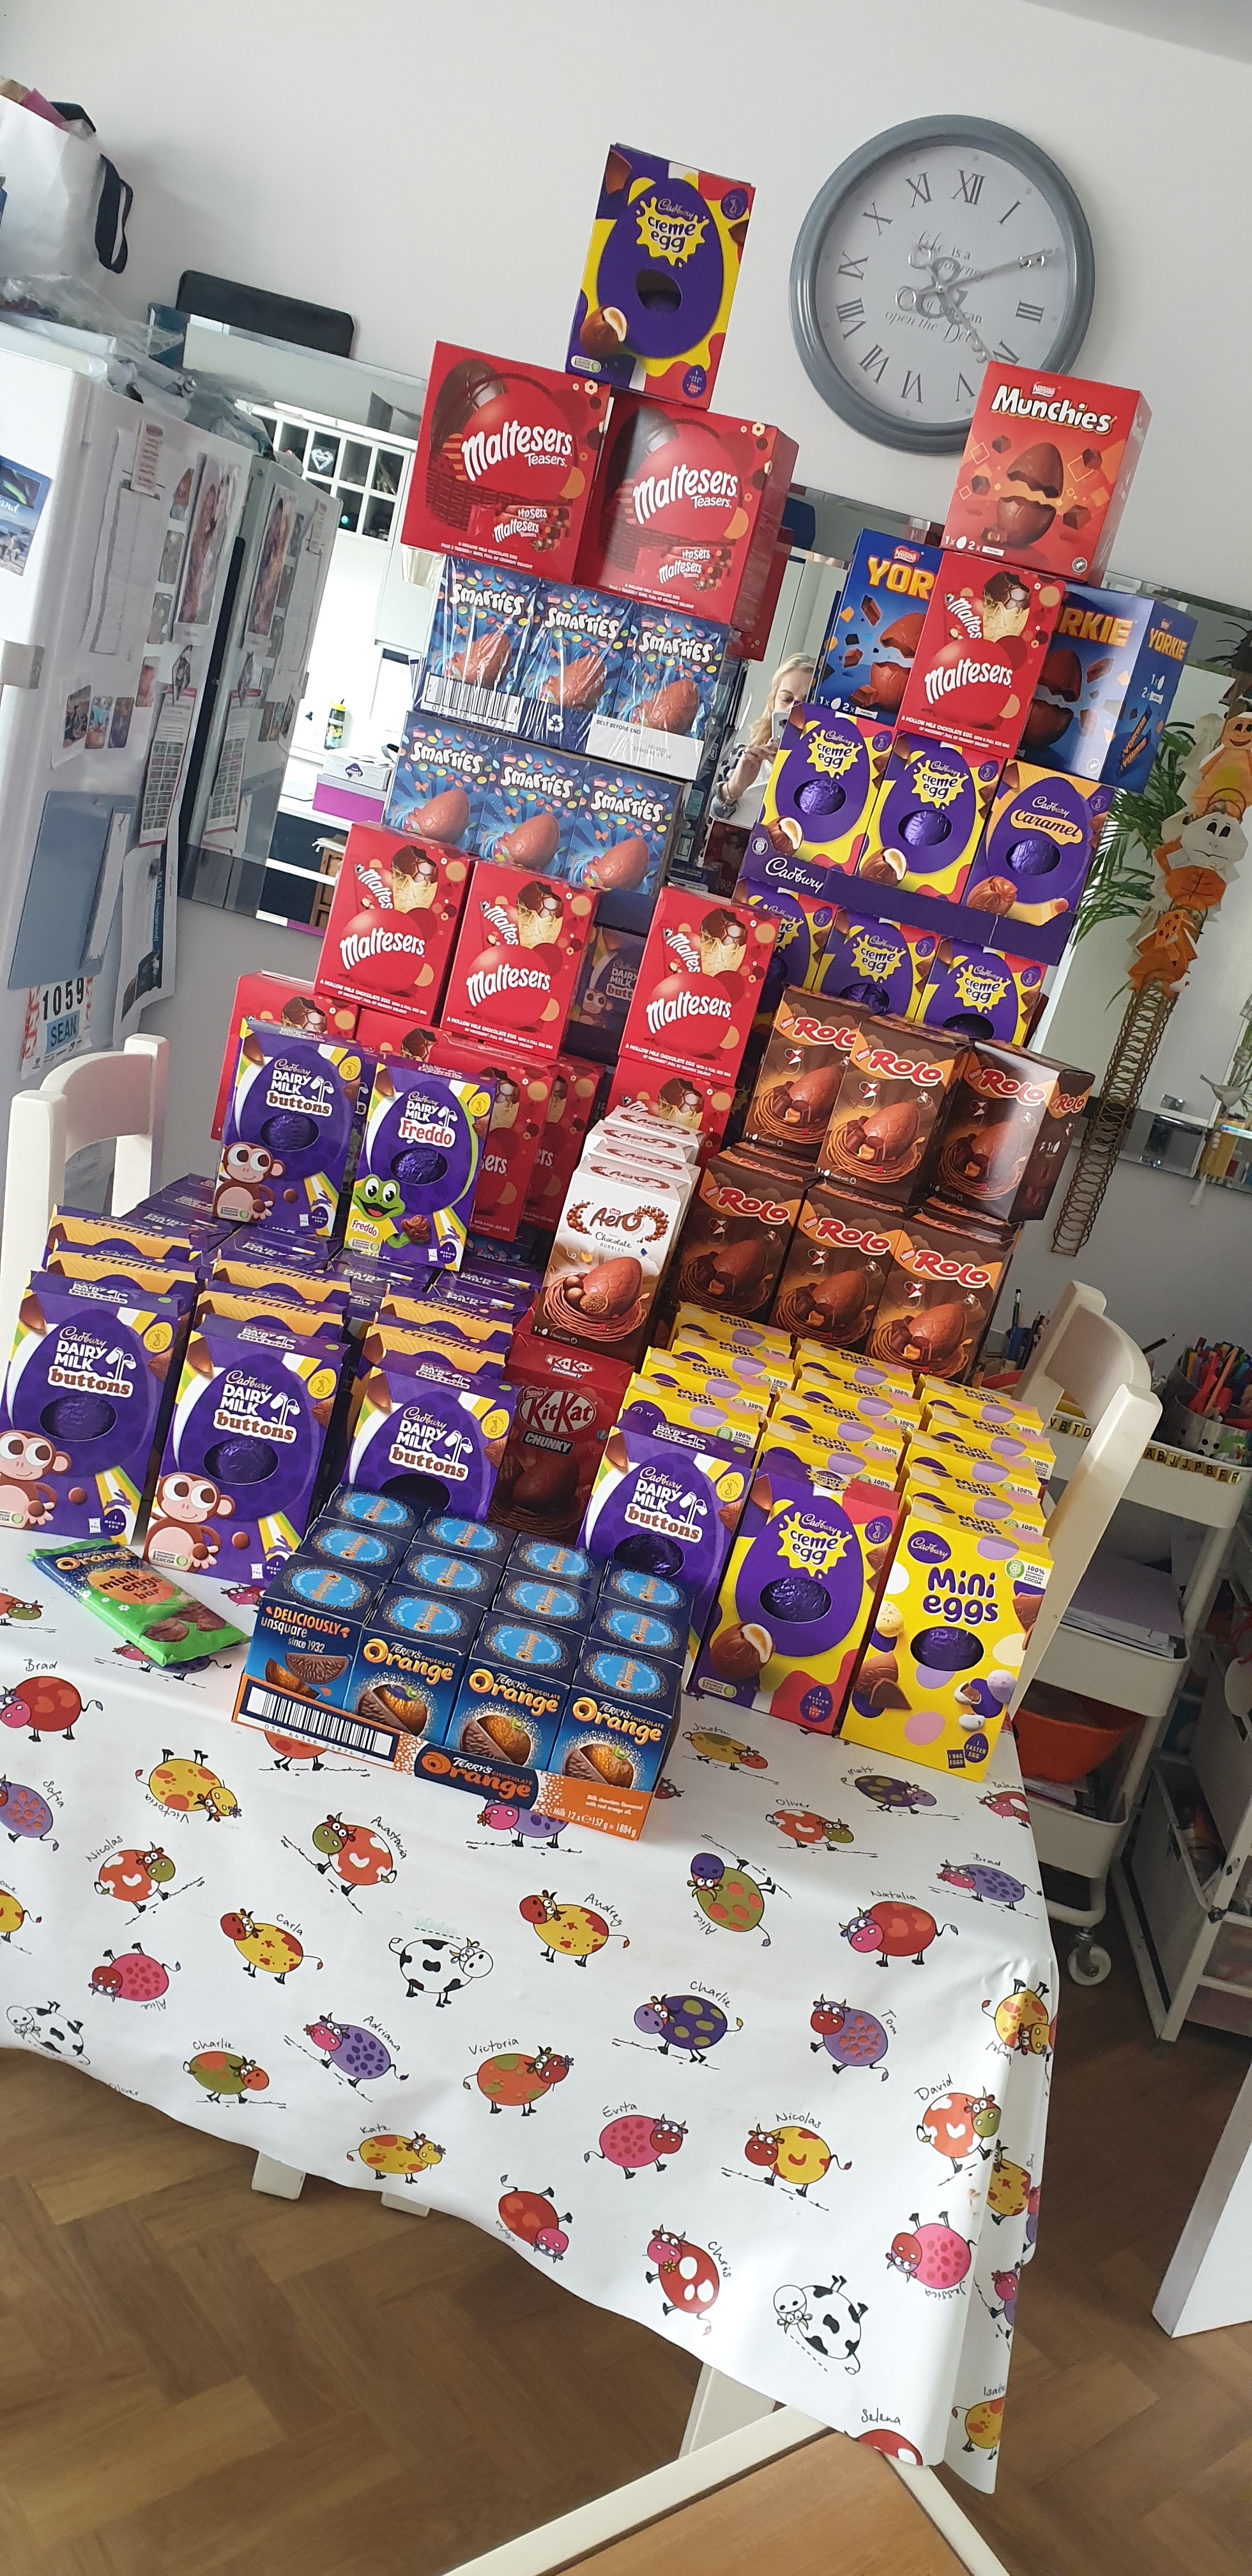 The Easter egg donations are dropped off at Clatterbridge Hospital.